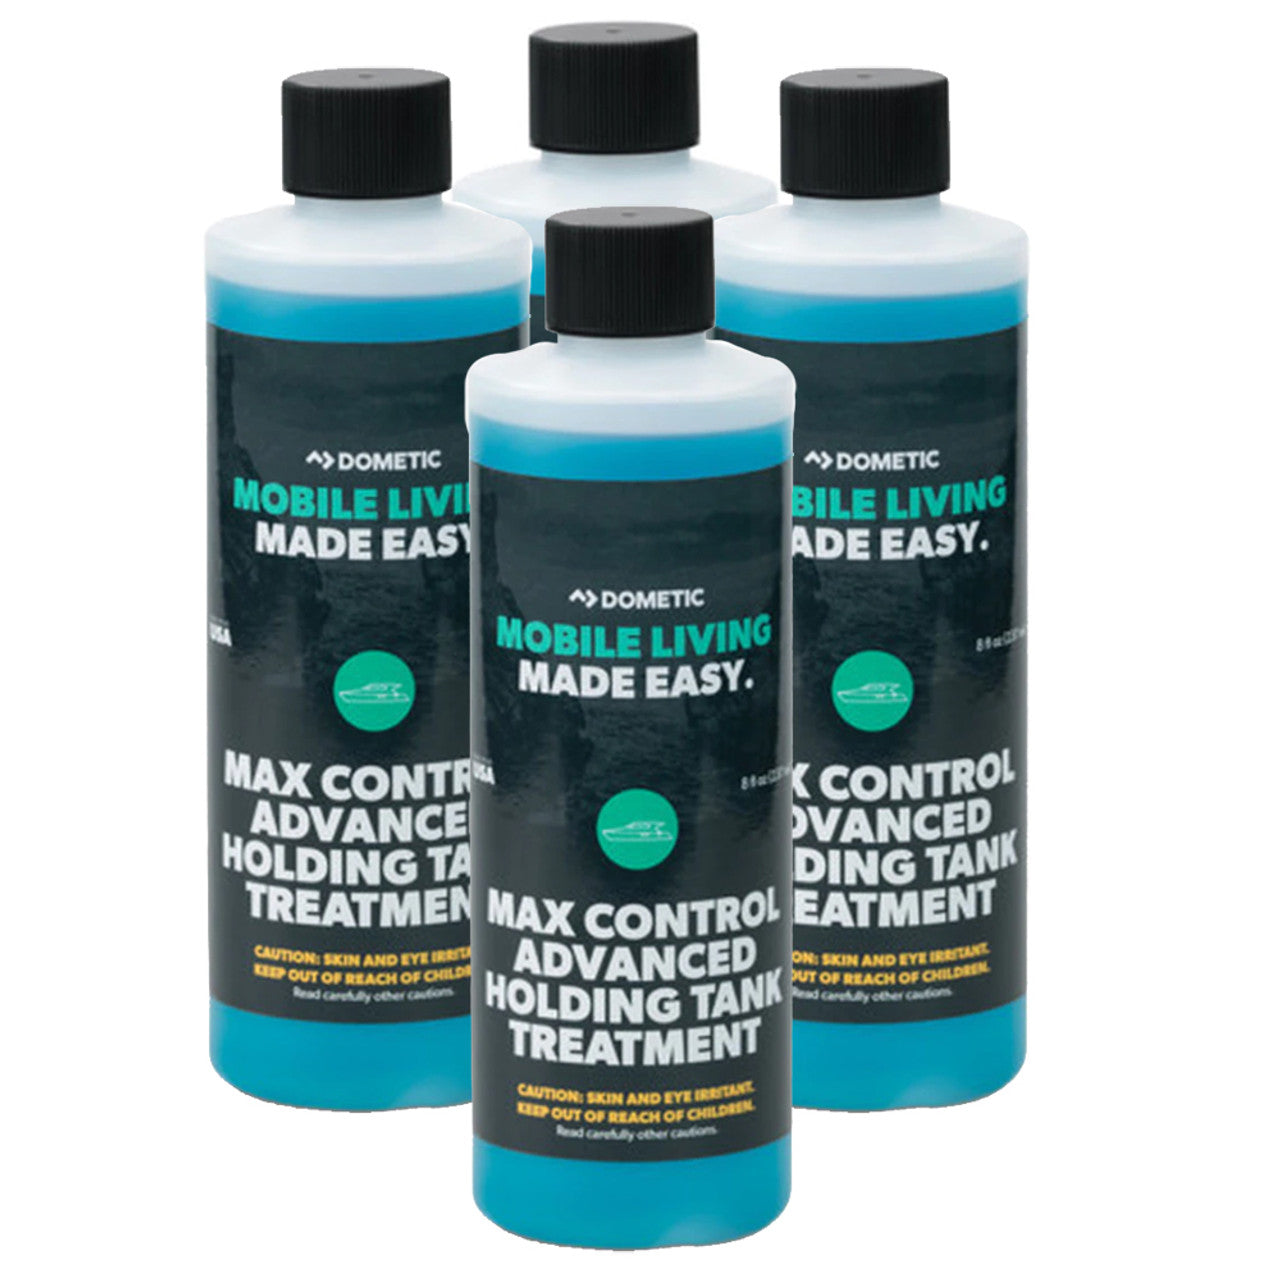 DOMETIC Max Control Holding Tank Deodorant - Four (4) Pack of Eight (8)oz. Bottles